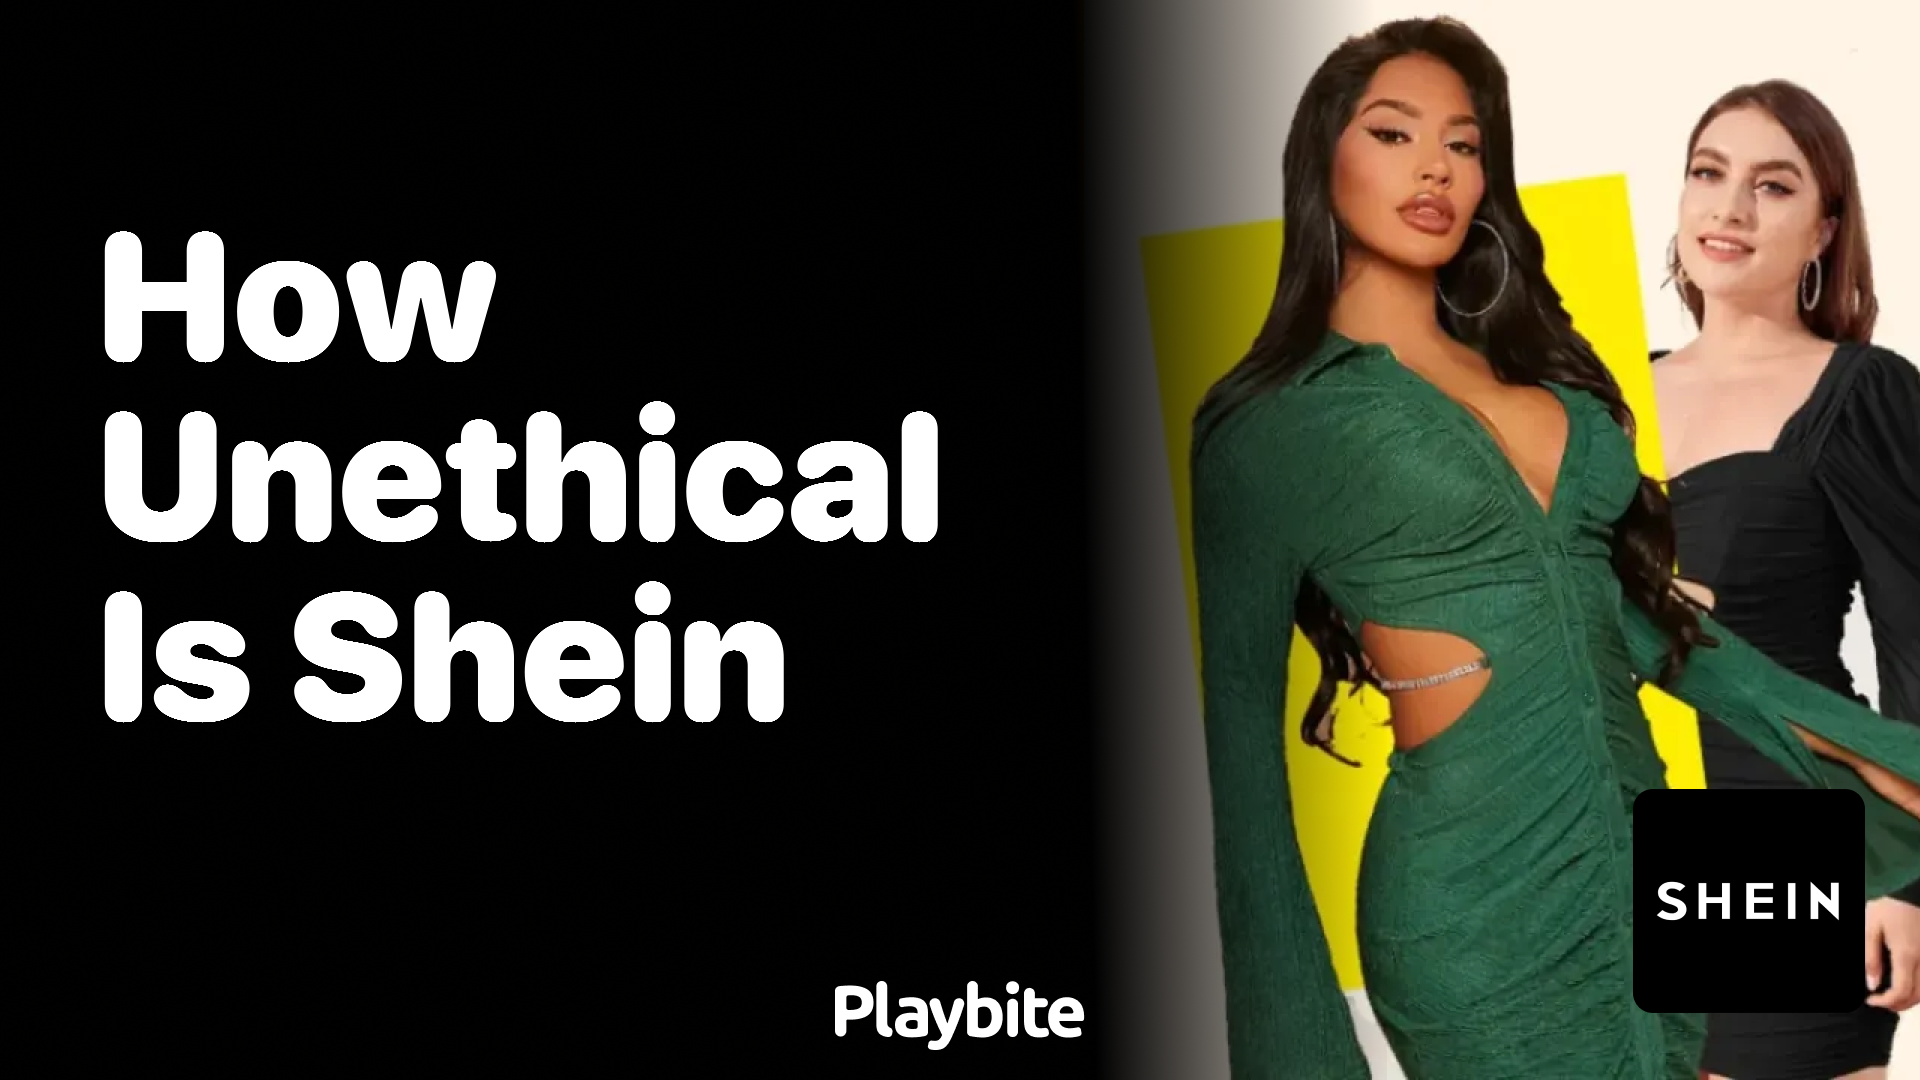 What SHEIN is Doing Wrong: The Importance of Having an Ethical